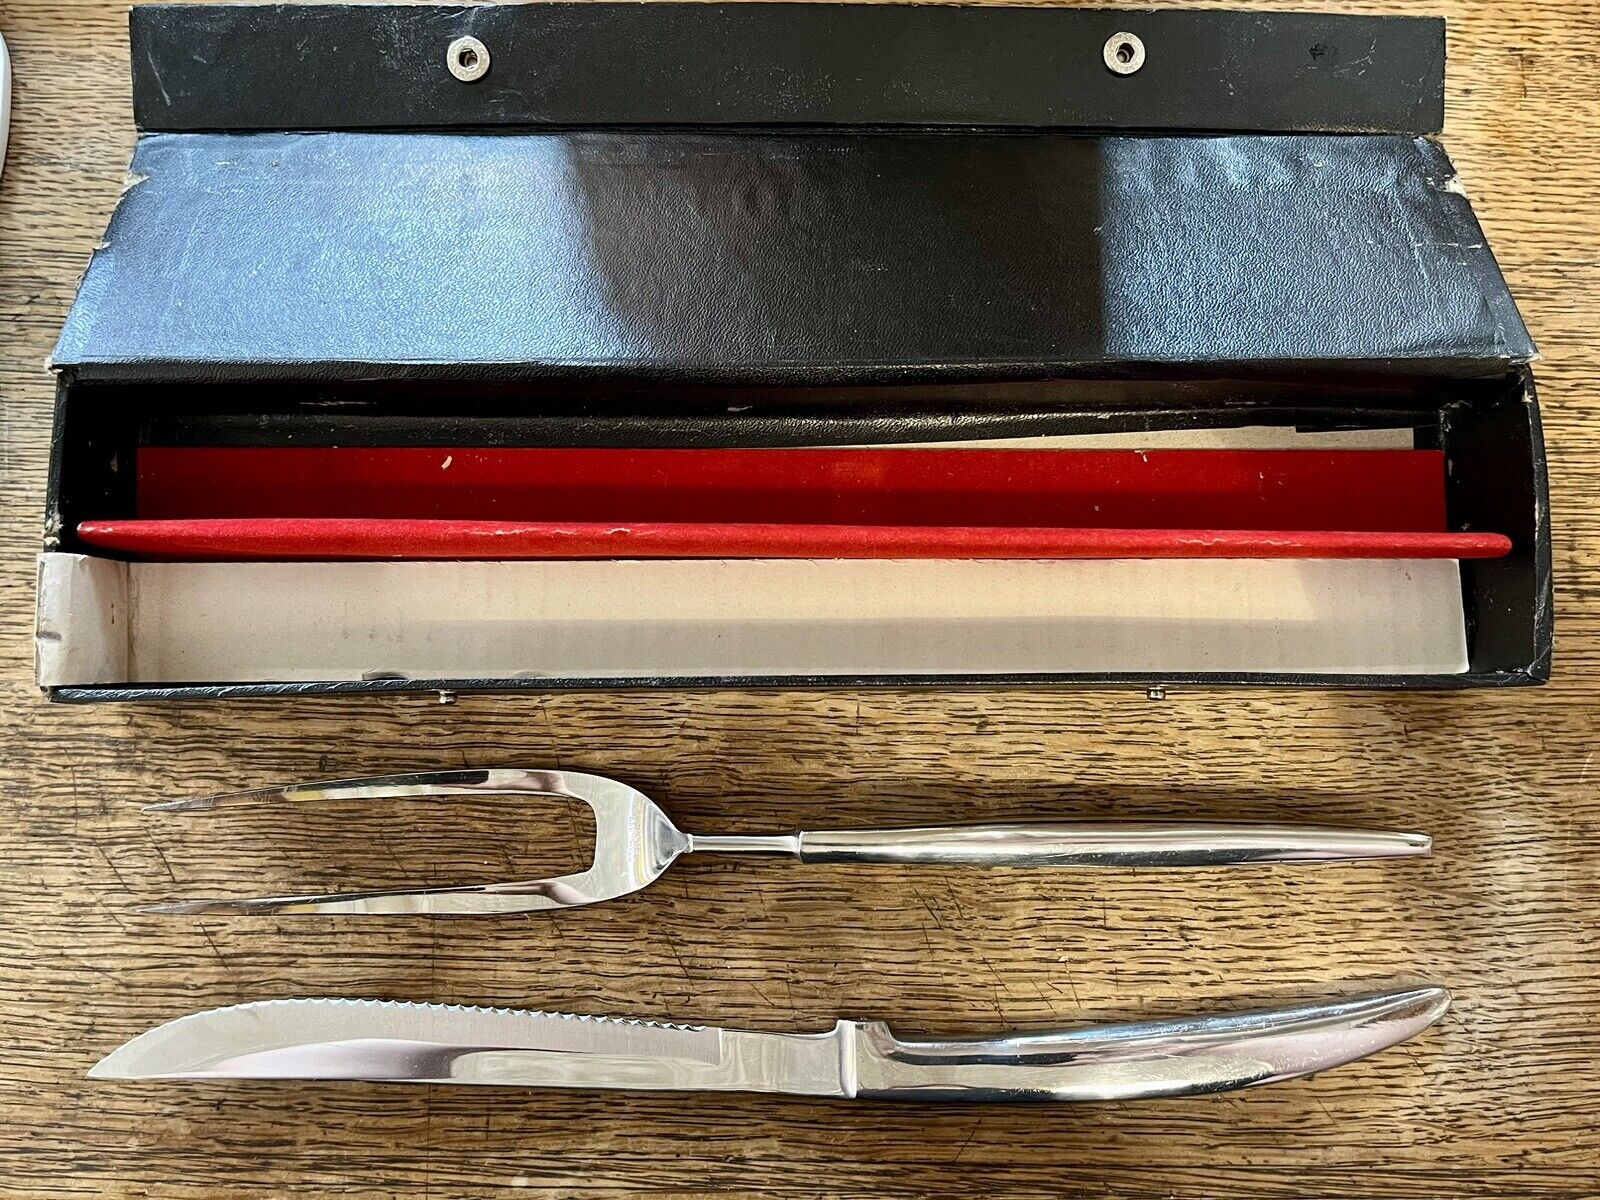 Vtg Mid Century Stainless Steel Japan Carving Set Knife And Meat Fork w/ Box MCM